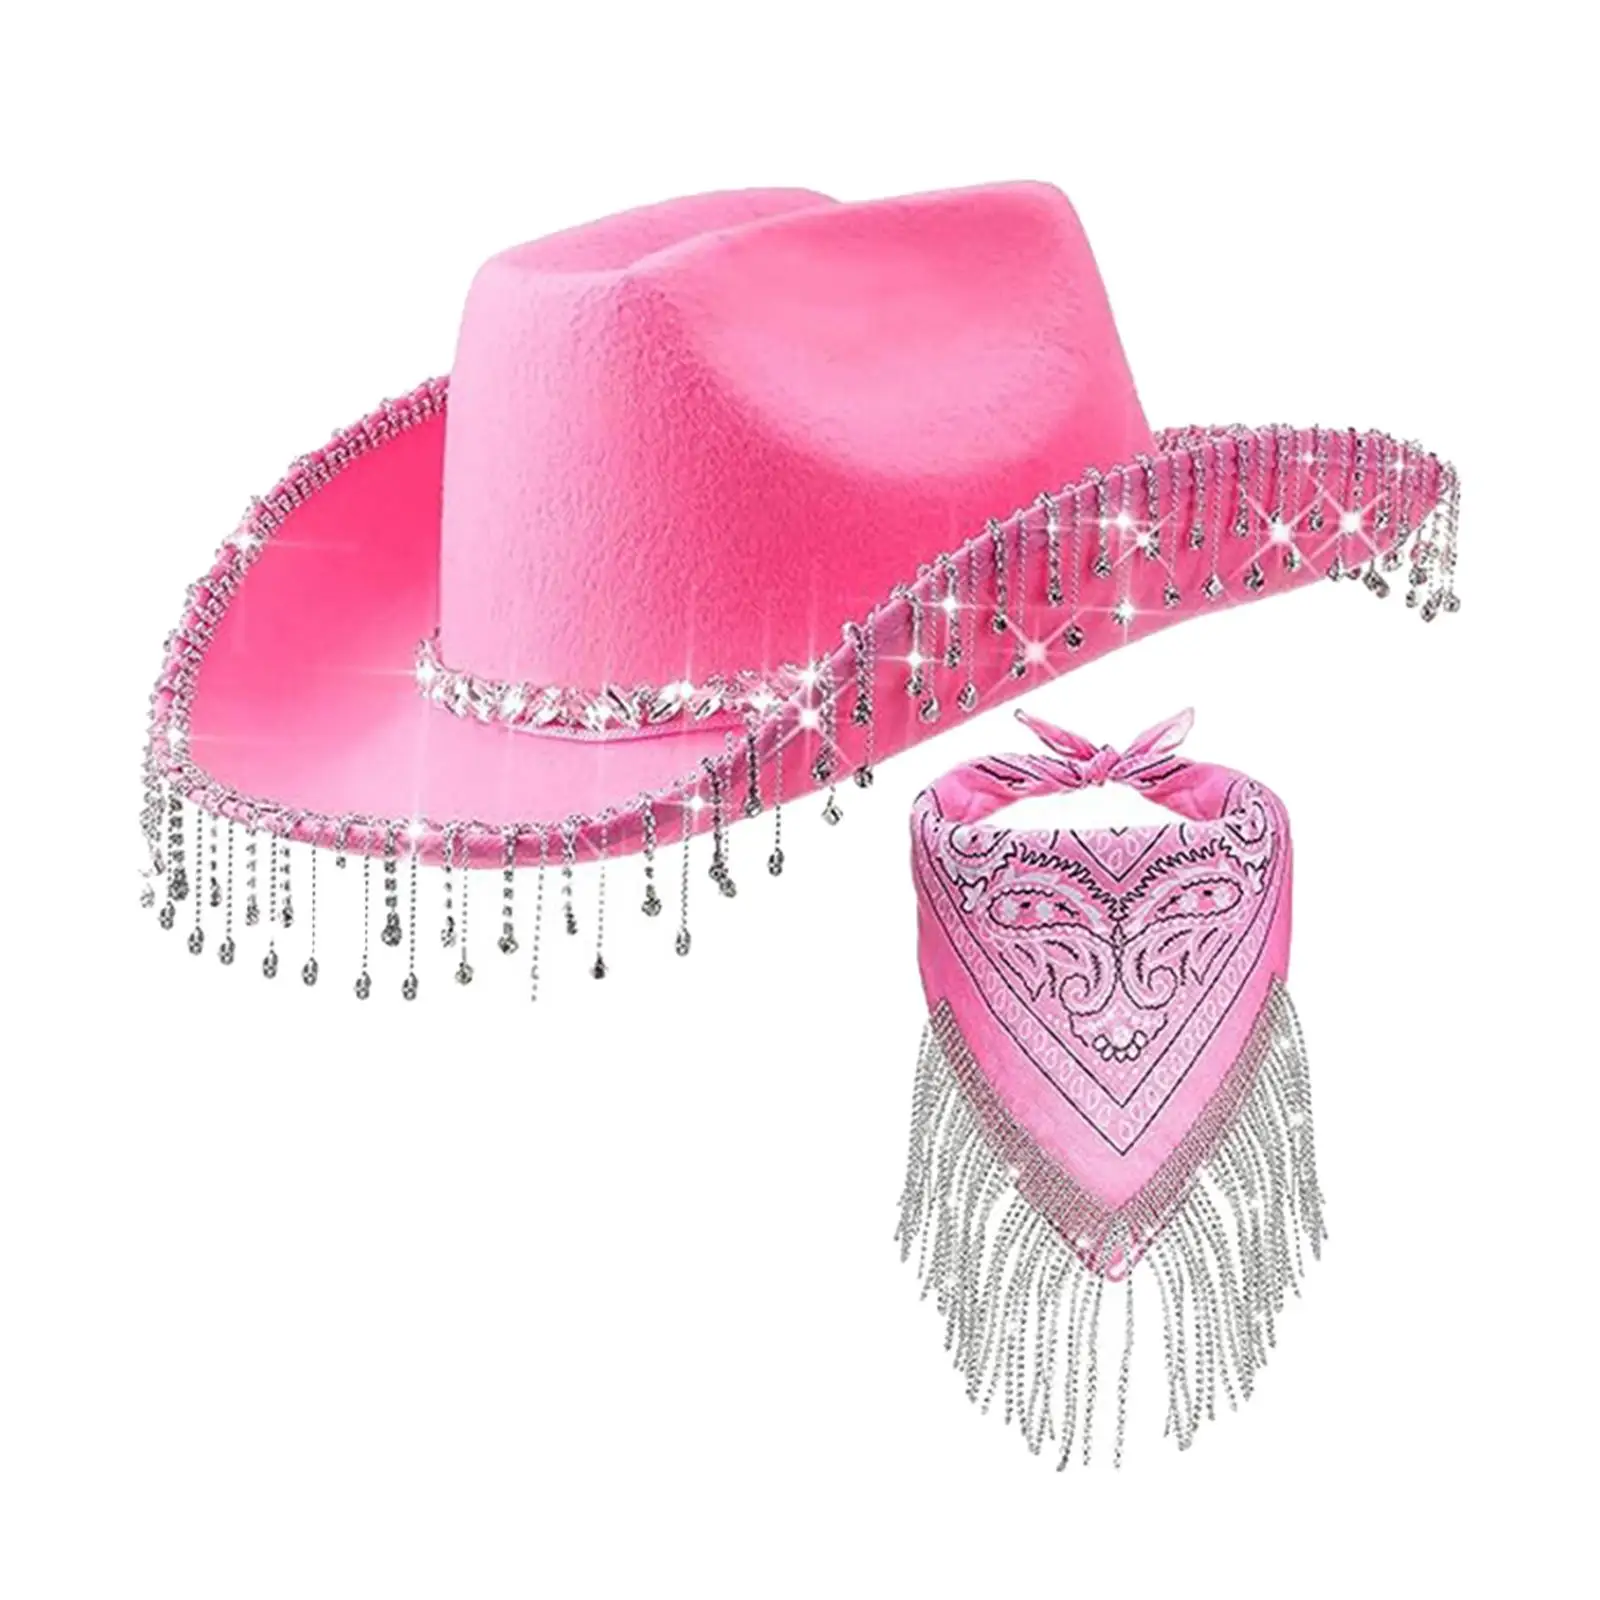 Western Cowboy Hat with Fringed Bandana Western Cowgirl Hat for Women Ladies Girls Wedding Costume Accessories Festival Holiday